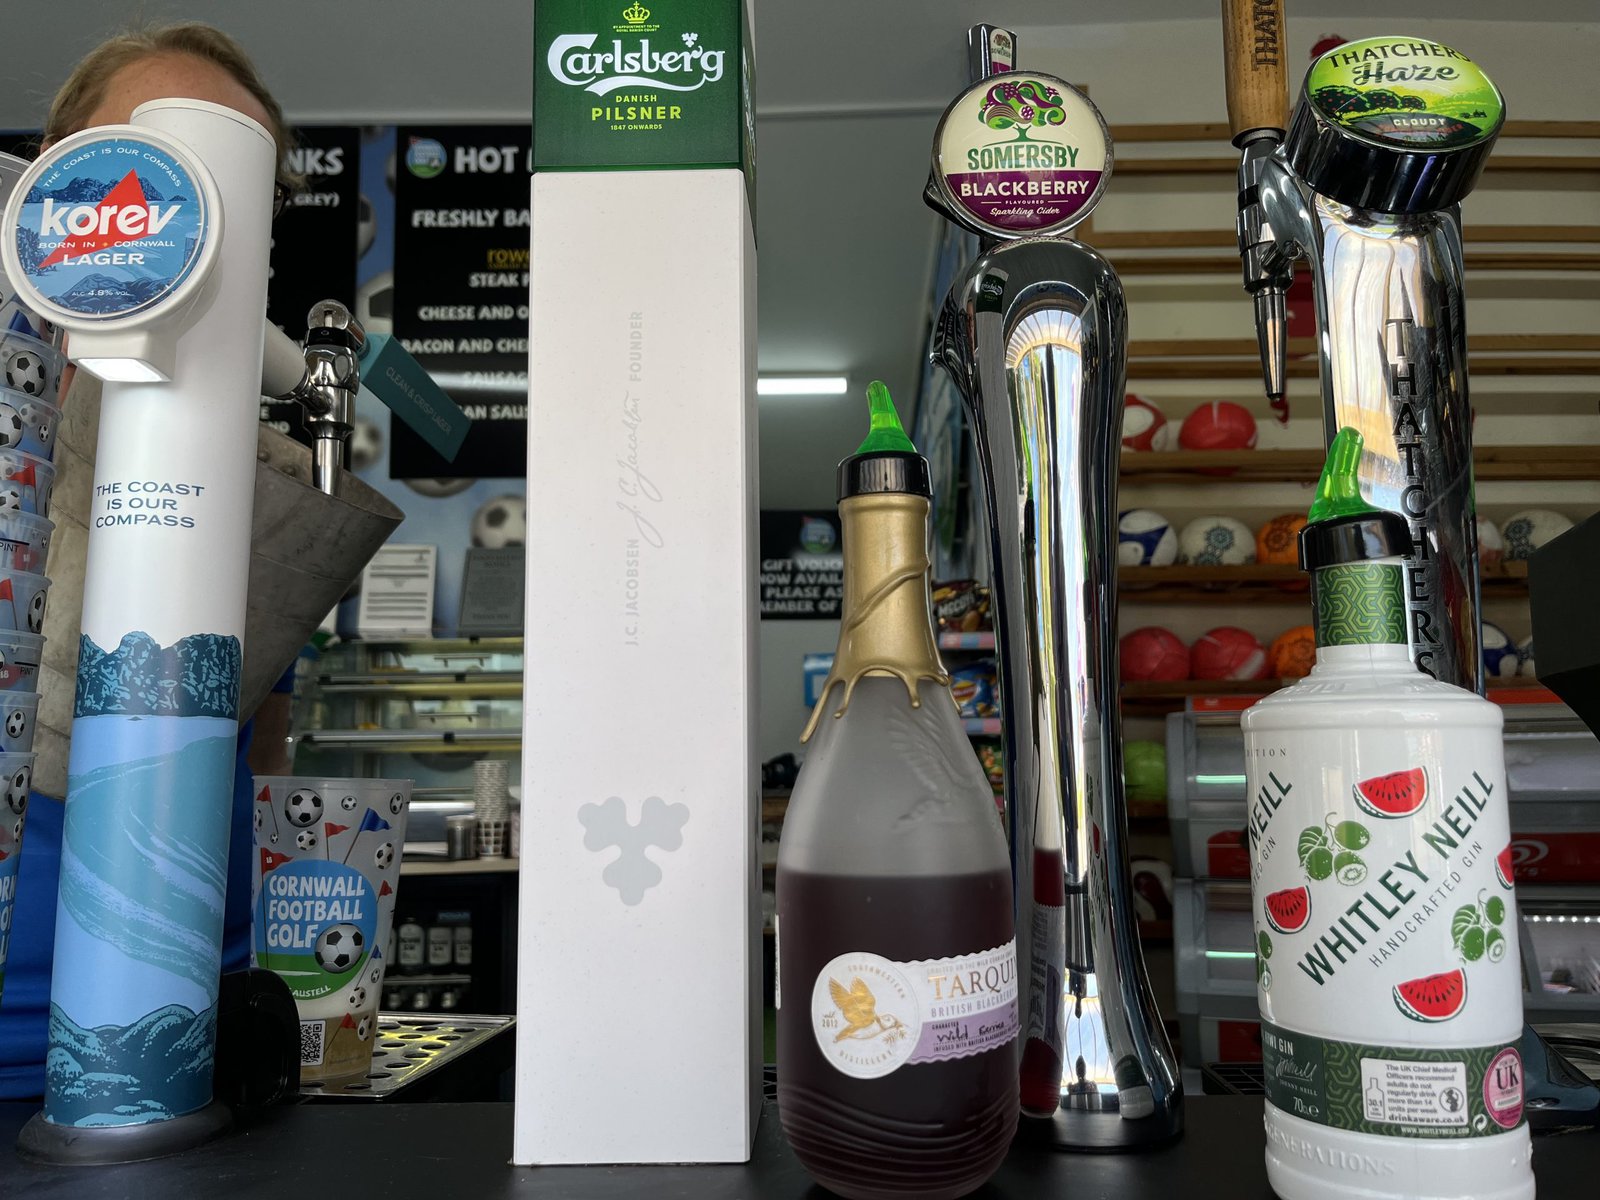 the 19th Hole - Cornish Corev, Carlsberg Somersby and Thatchers Cider, Gin, Prosecco & Wine